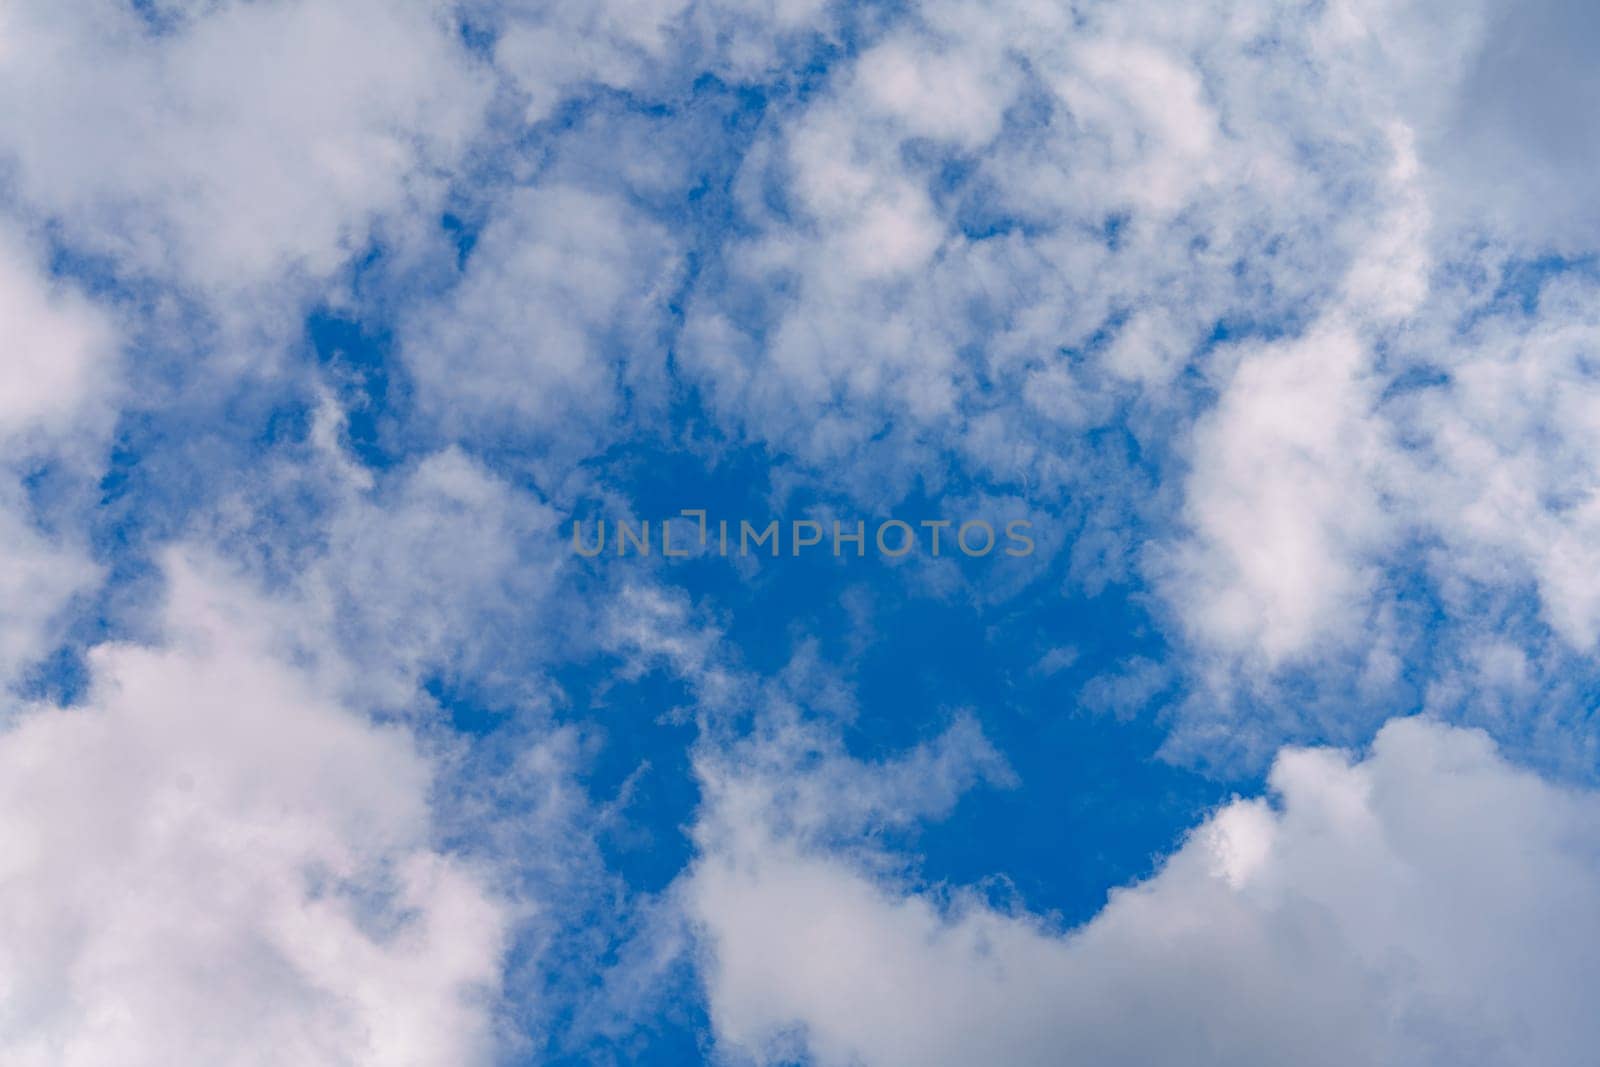 Blue Sky with Lots of White Clouds: Background for Replacement or Inspiring Ideas.